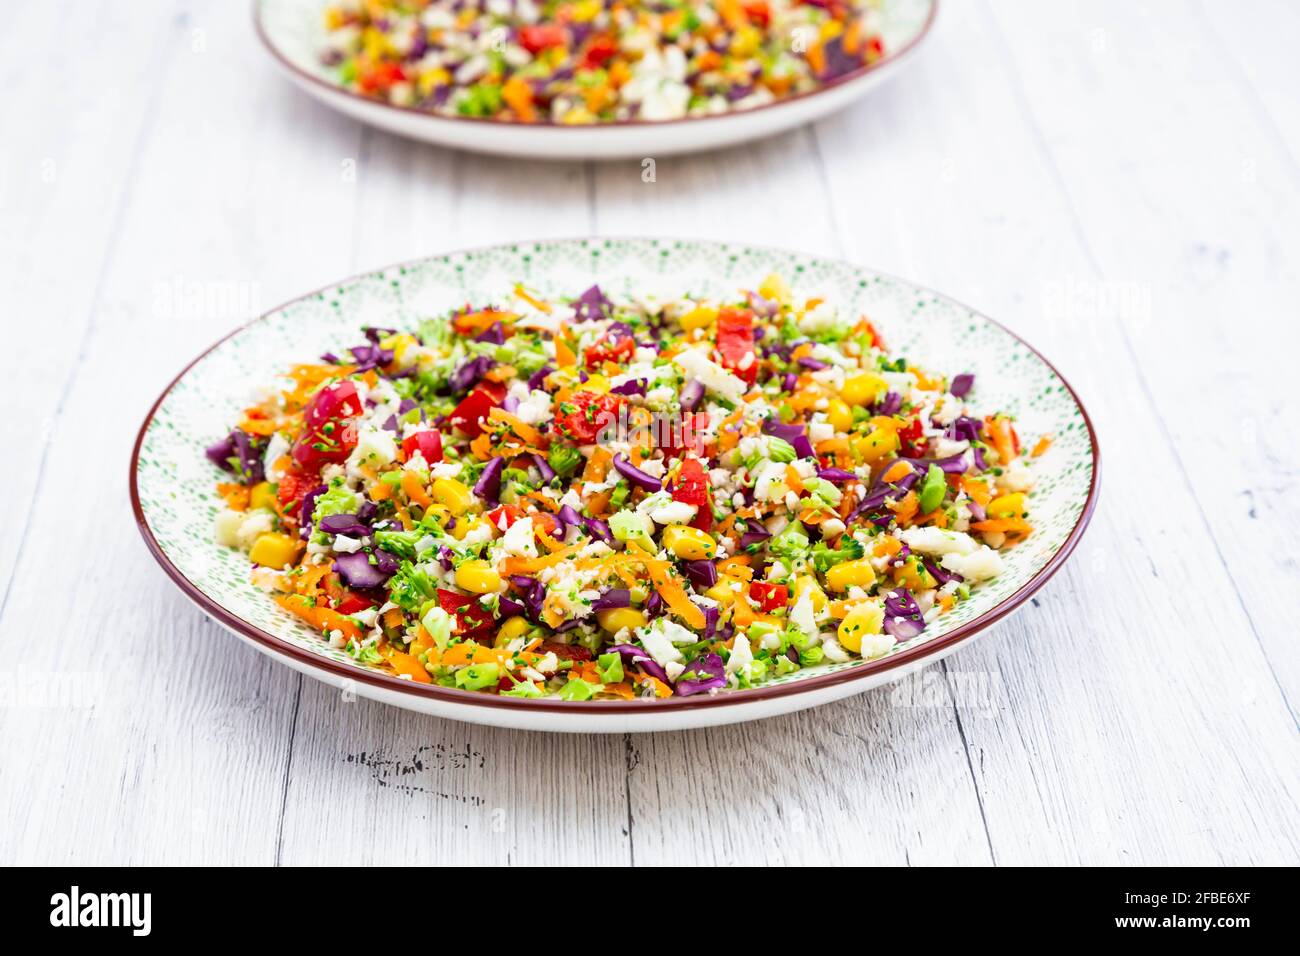 Rainbow salad made out of broccoli, carrot, corn, cauliflower, red cabbage, red bell pepper Stock Photo